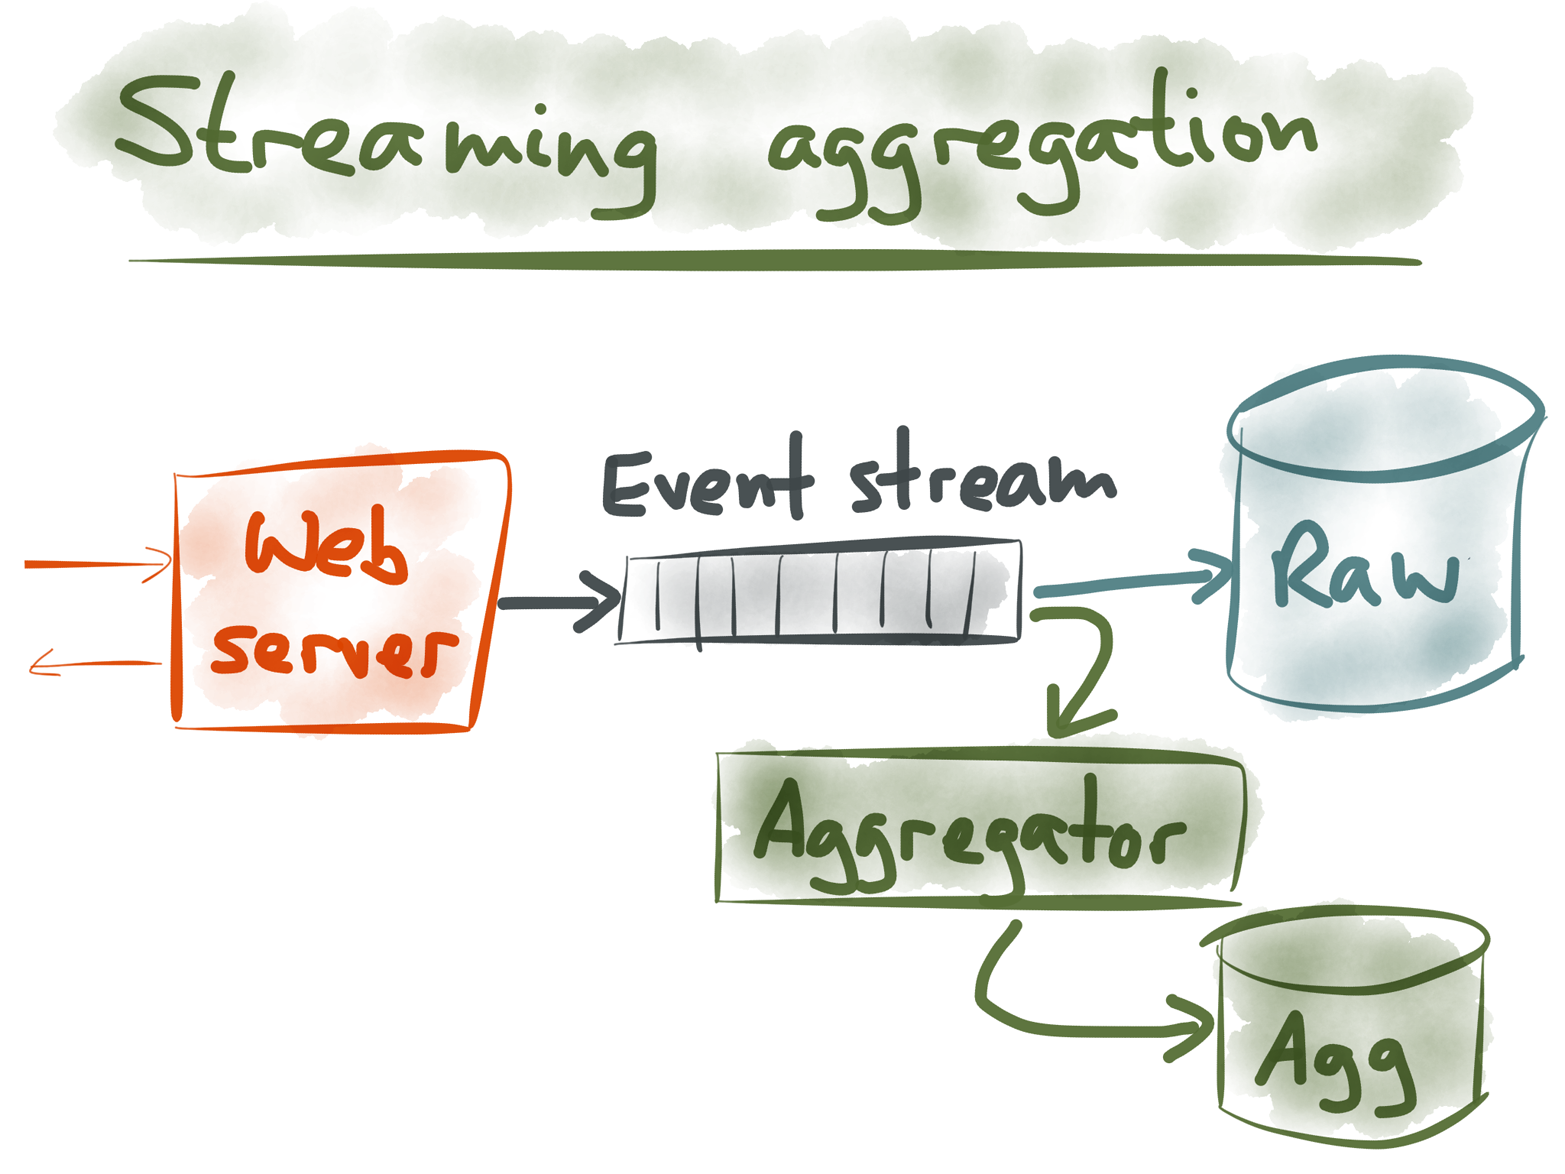 Implementing streaming aggregation with an event stream.